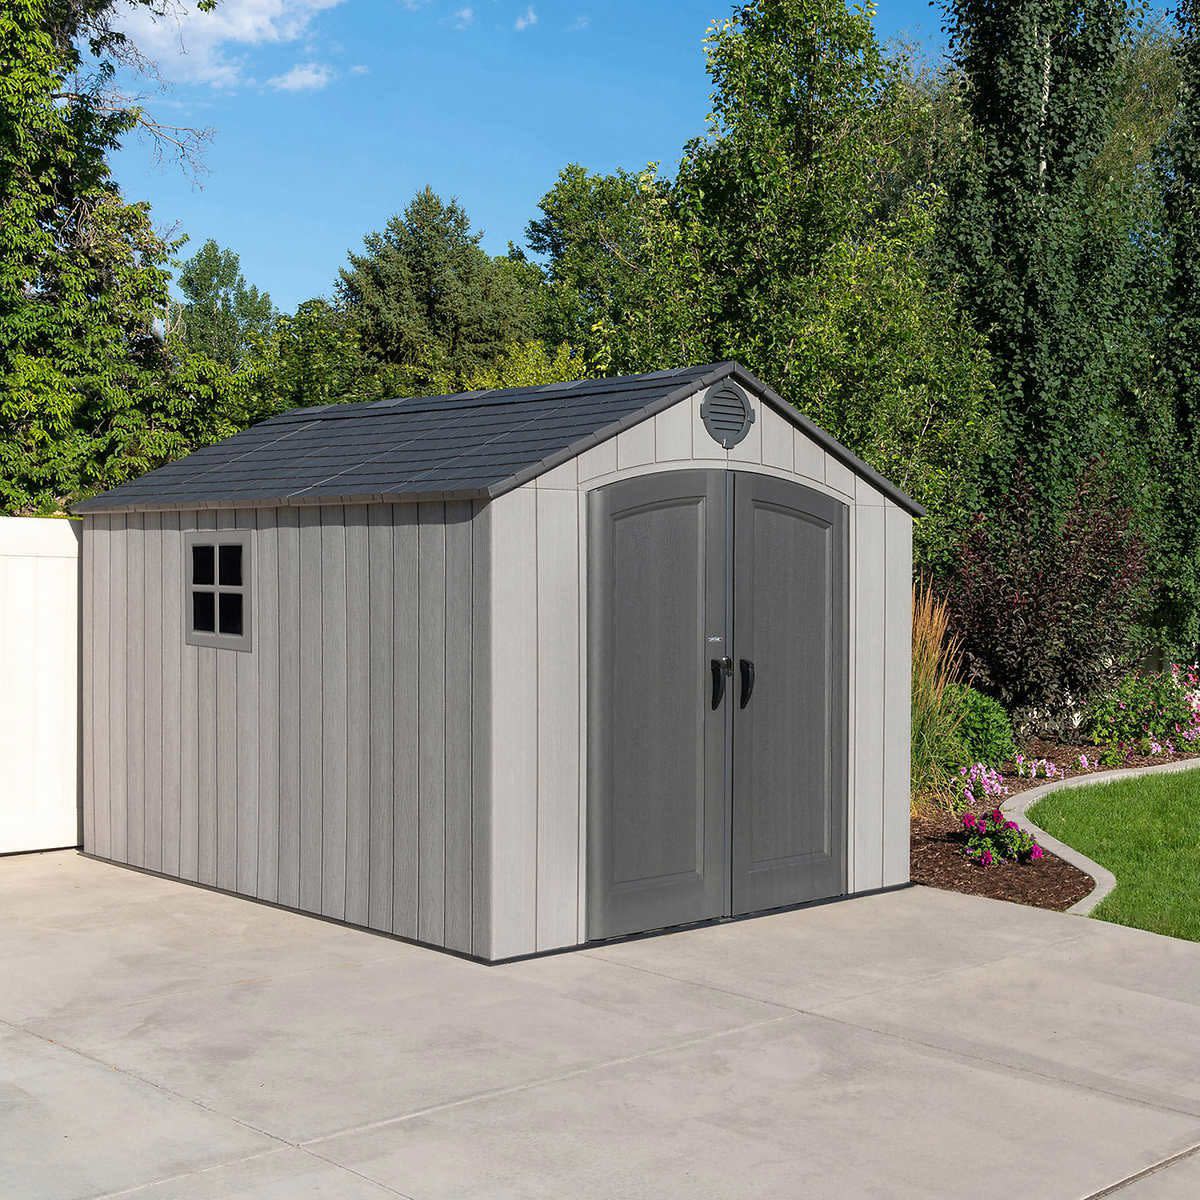 Lifetime-brand outdoor shed from Costco